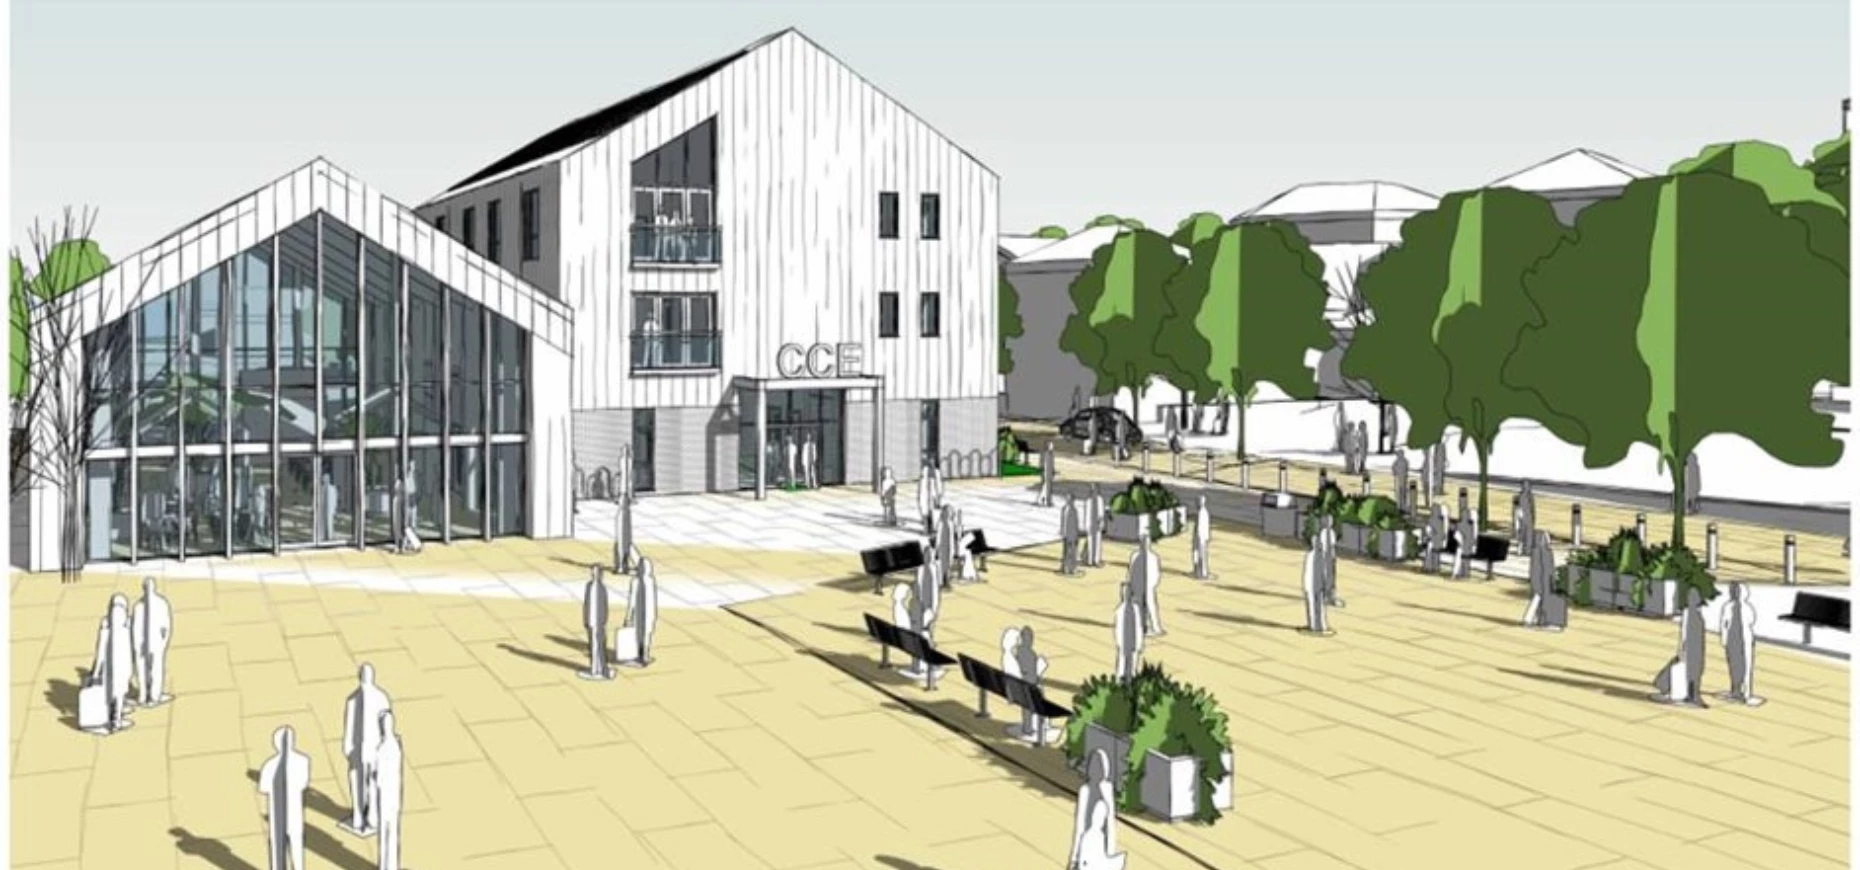 An artist's rendition of what the Catterick Garrison’s town centre redevelopment could look like.